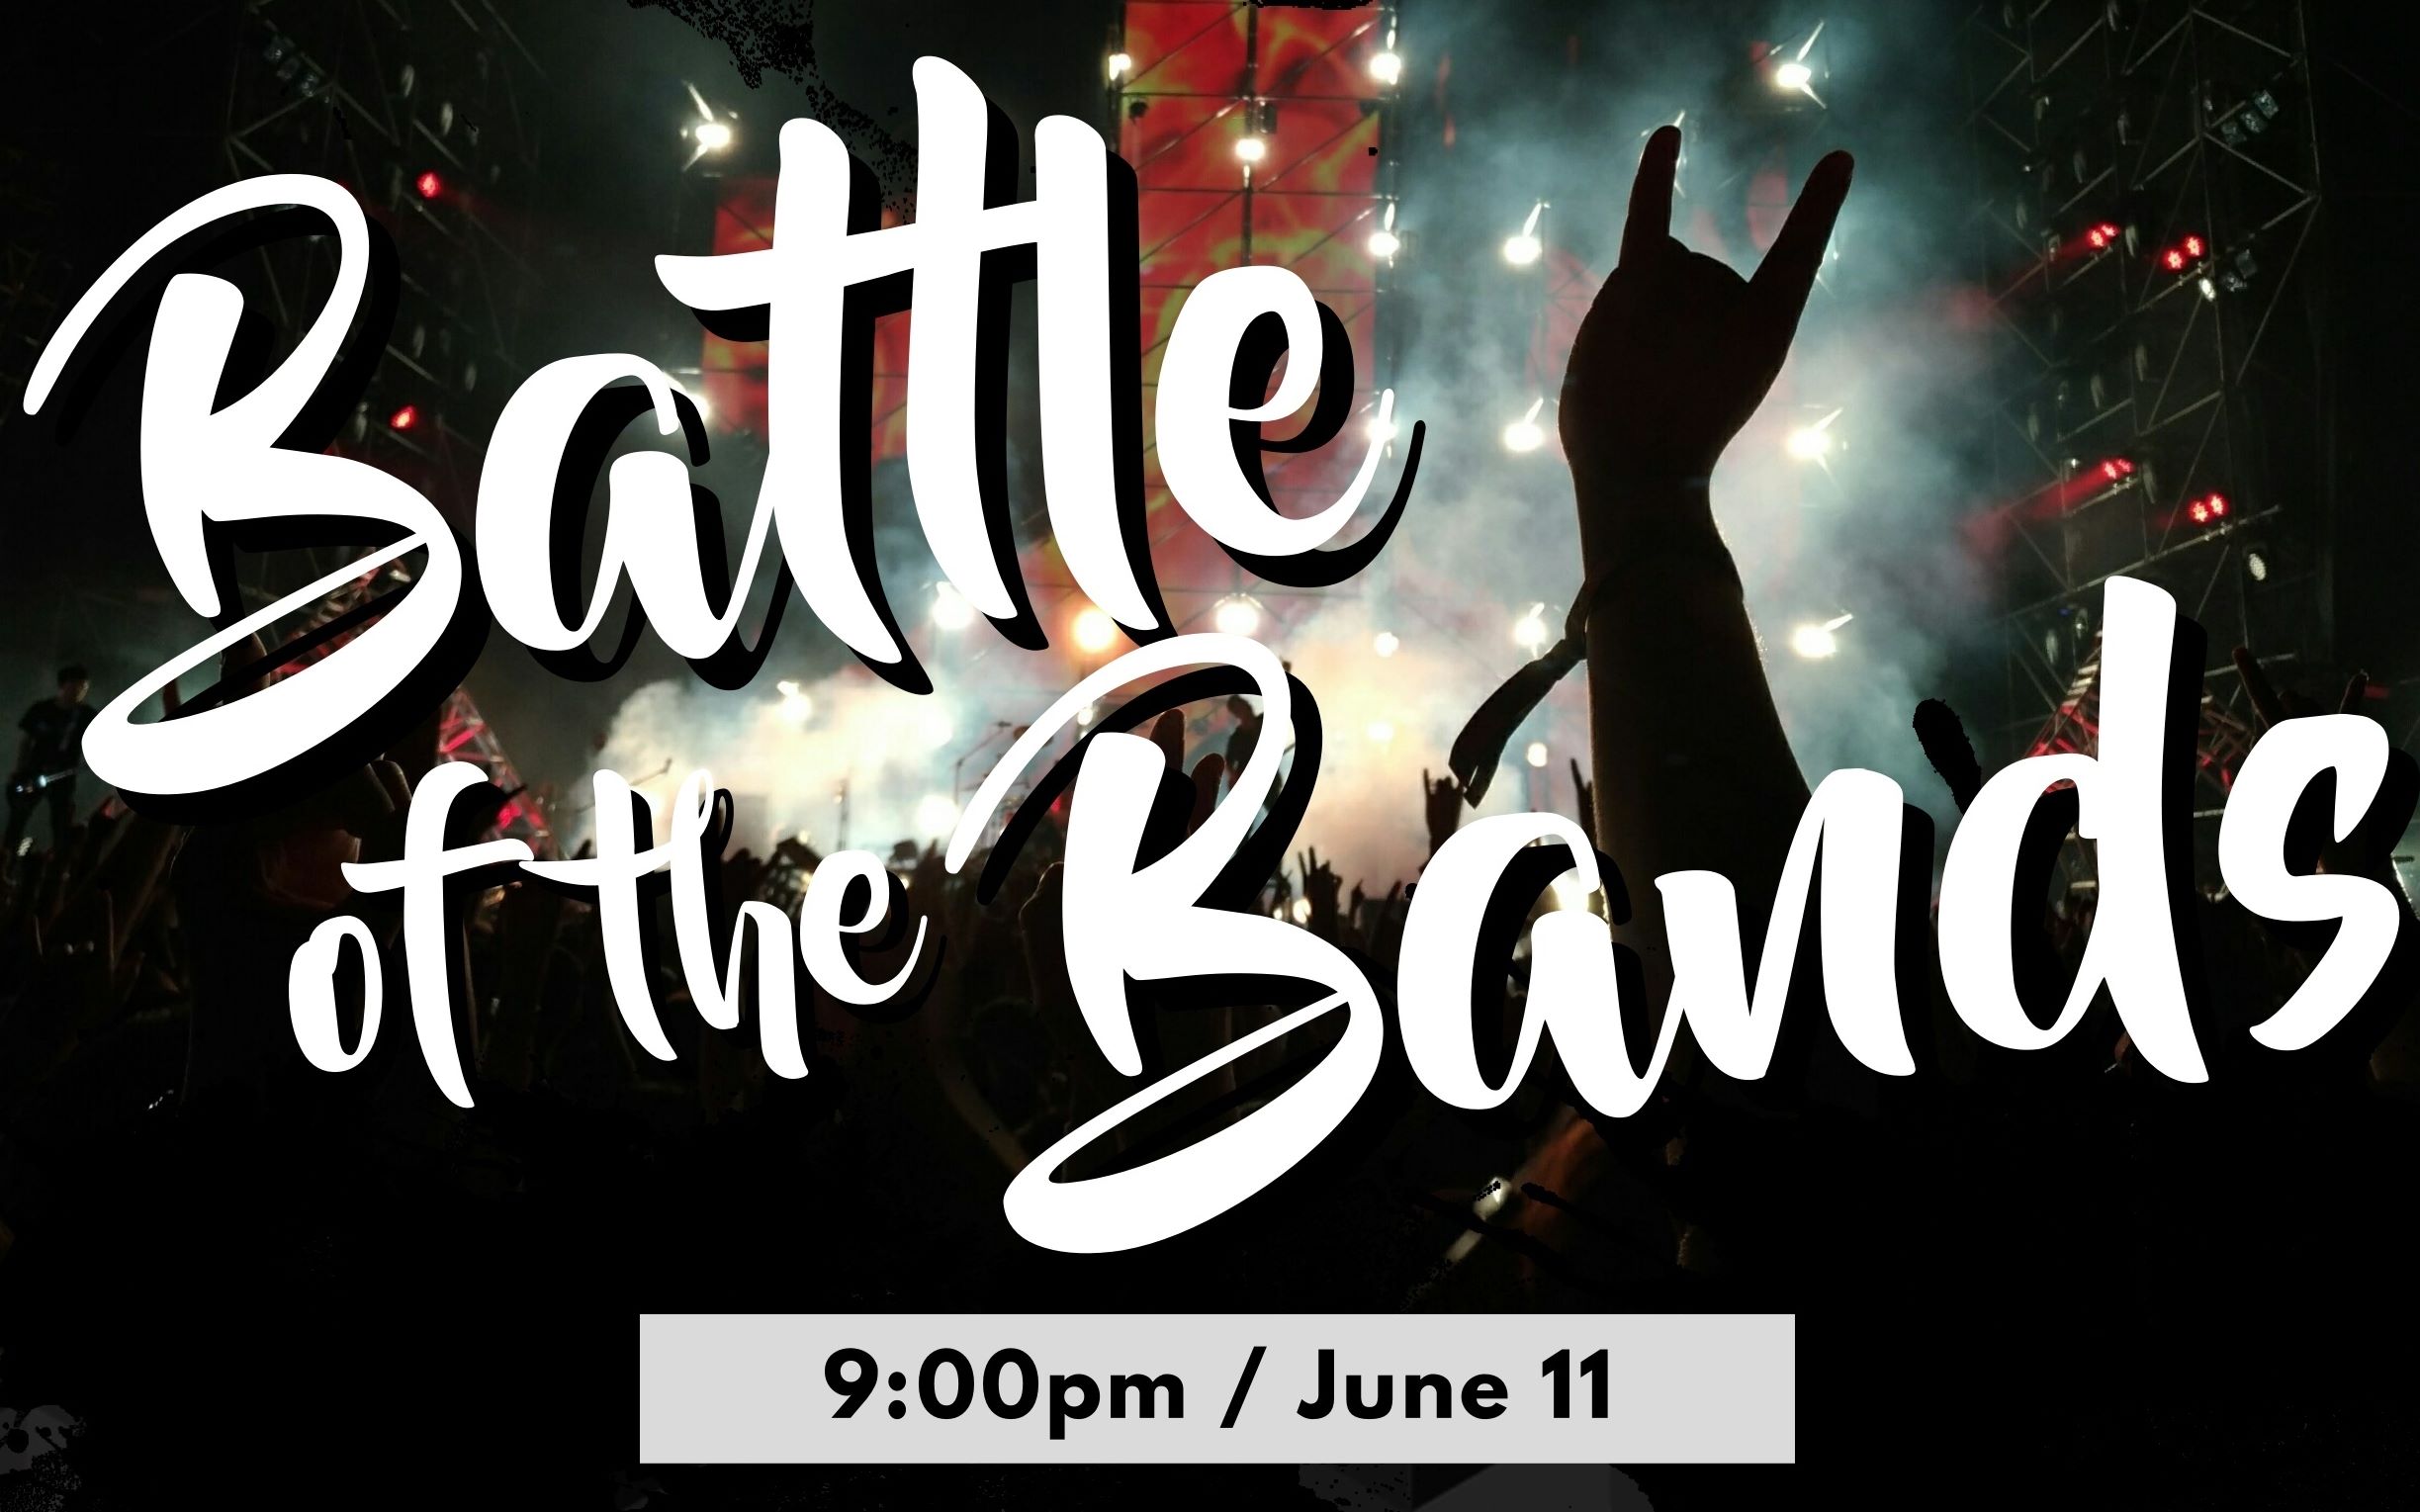 The battle of bands in 9 club on 11th June